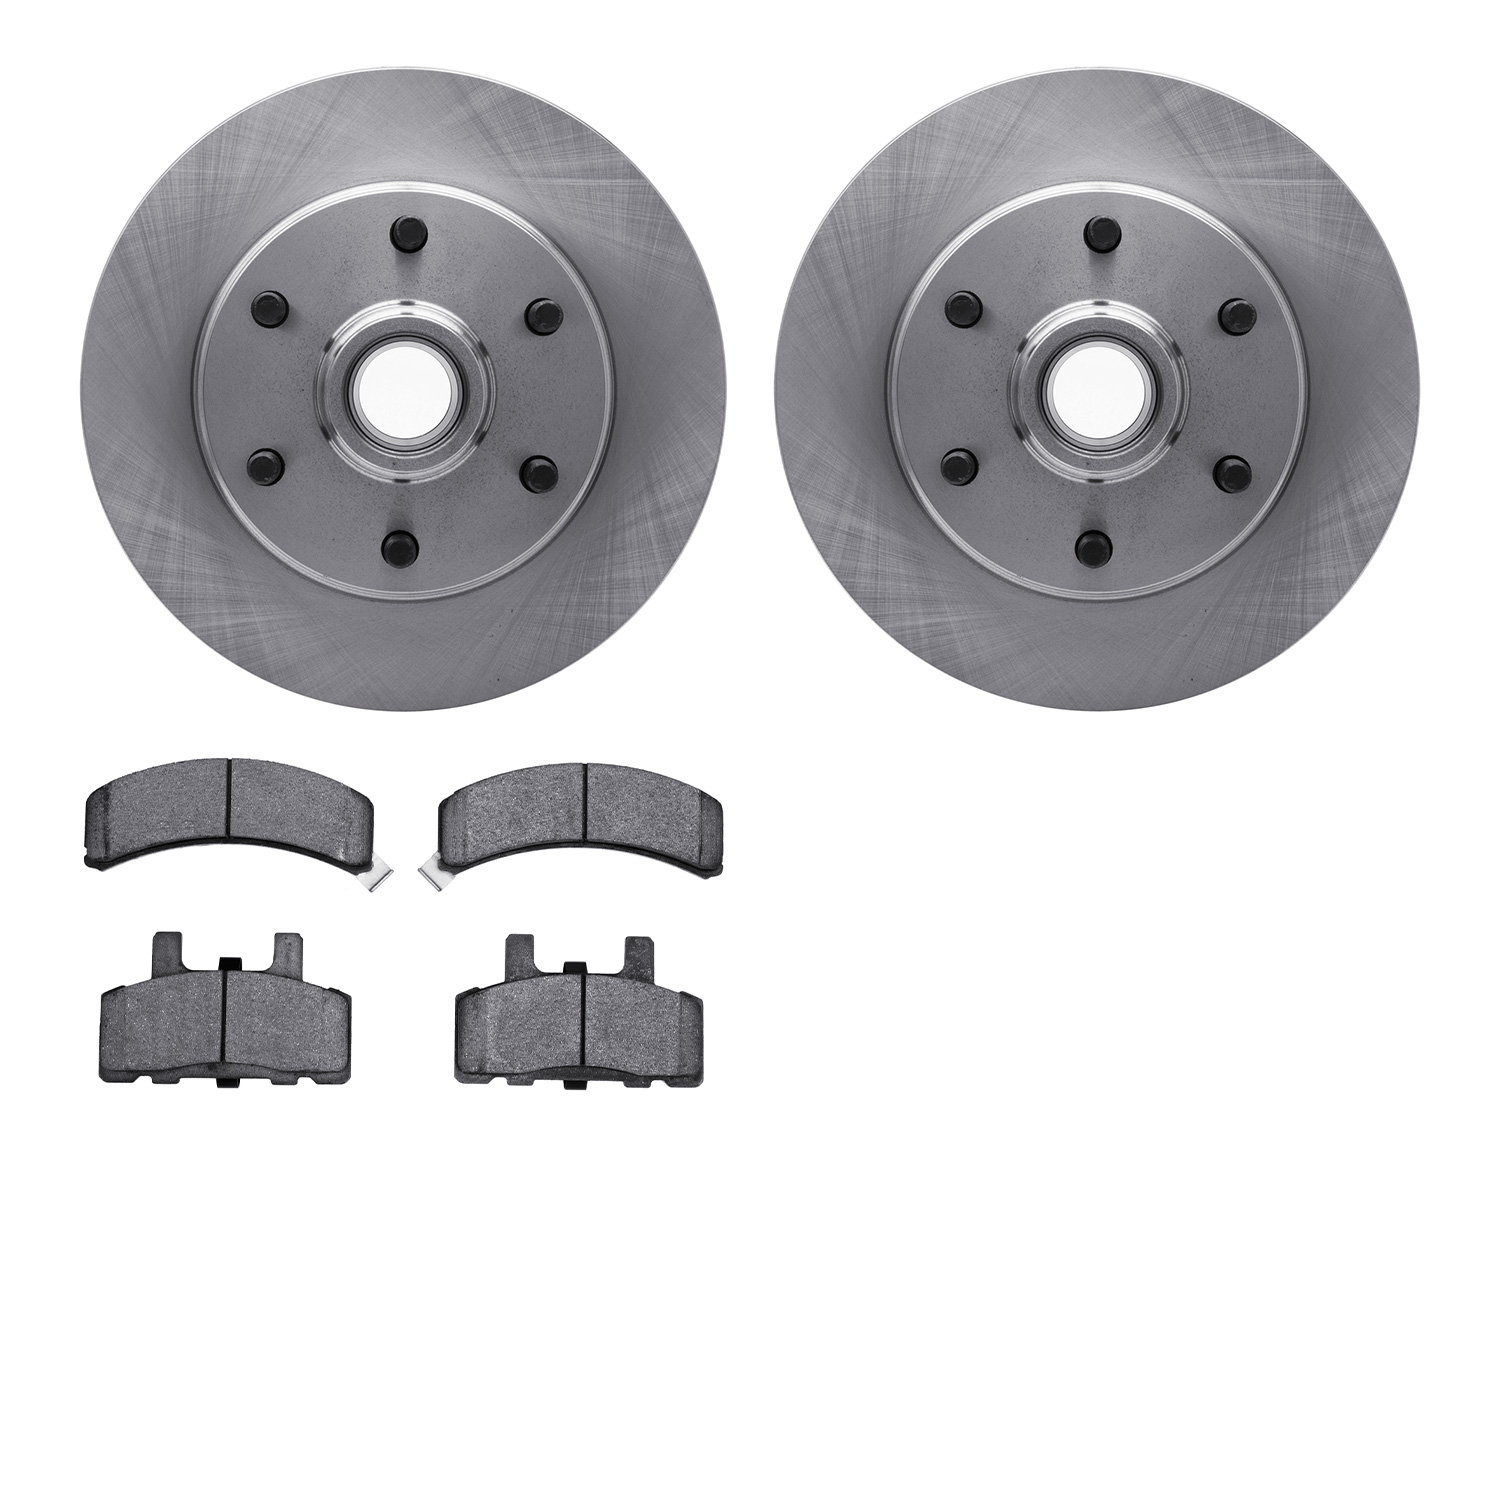 6402-48052 Brake Rotors with Ultimate-Duty Brake Pads, 1994-2002 GM, Position: Front